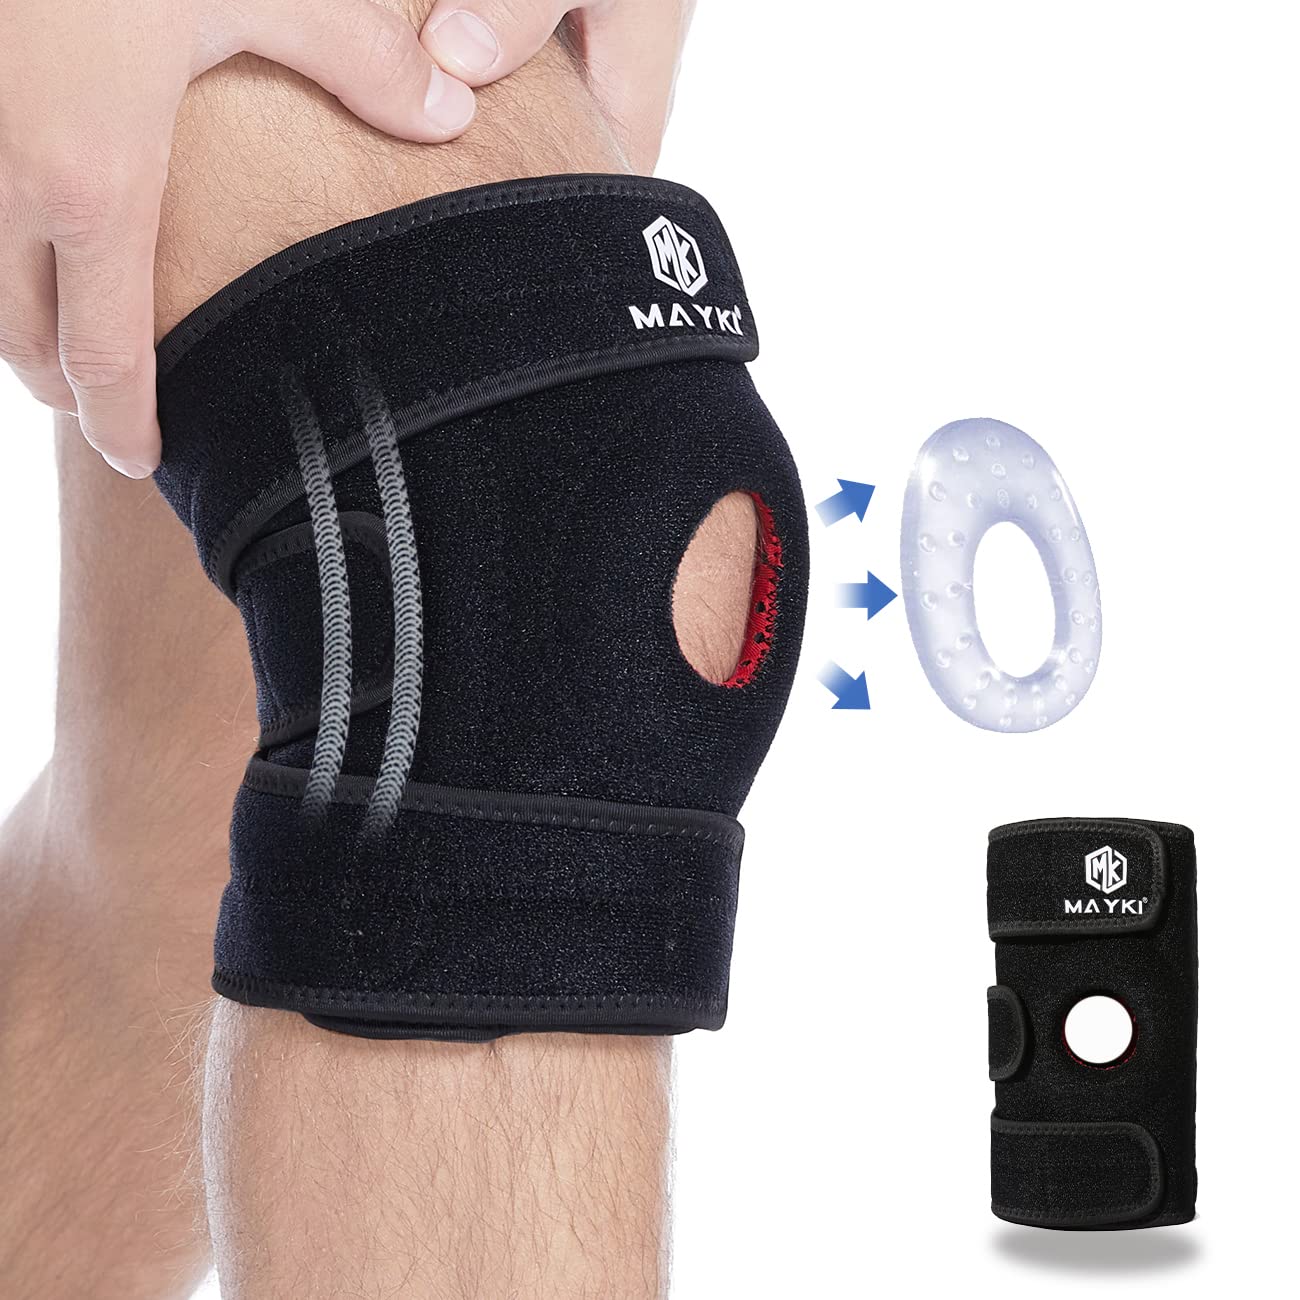 MAYKI Knee Support Men 1 PCS Adjustable Knee Support Brace for Men/Women  with Patella Gel Pad Anti-Slip Knee Supports for Arthritis/Ligament Damage Knee  Brace for Running/Weight Lifting One Size Dark Black 1